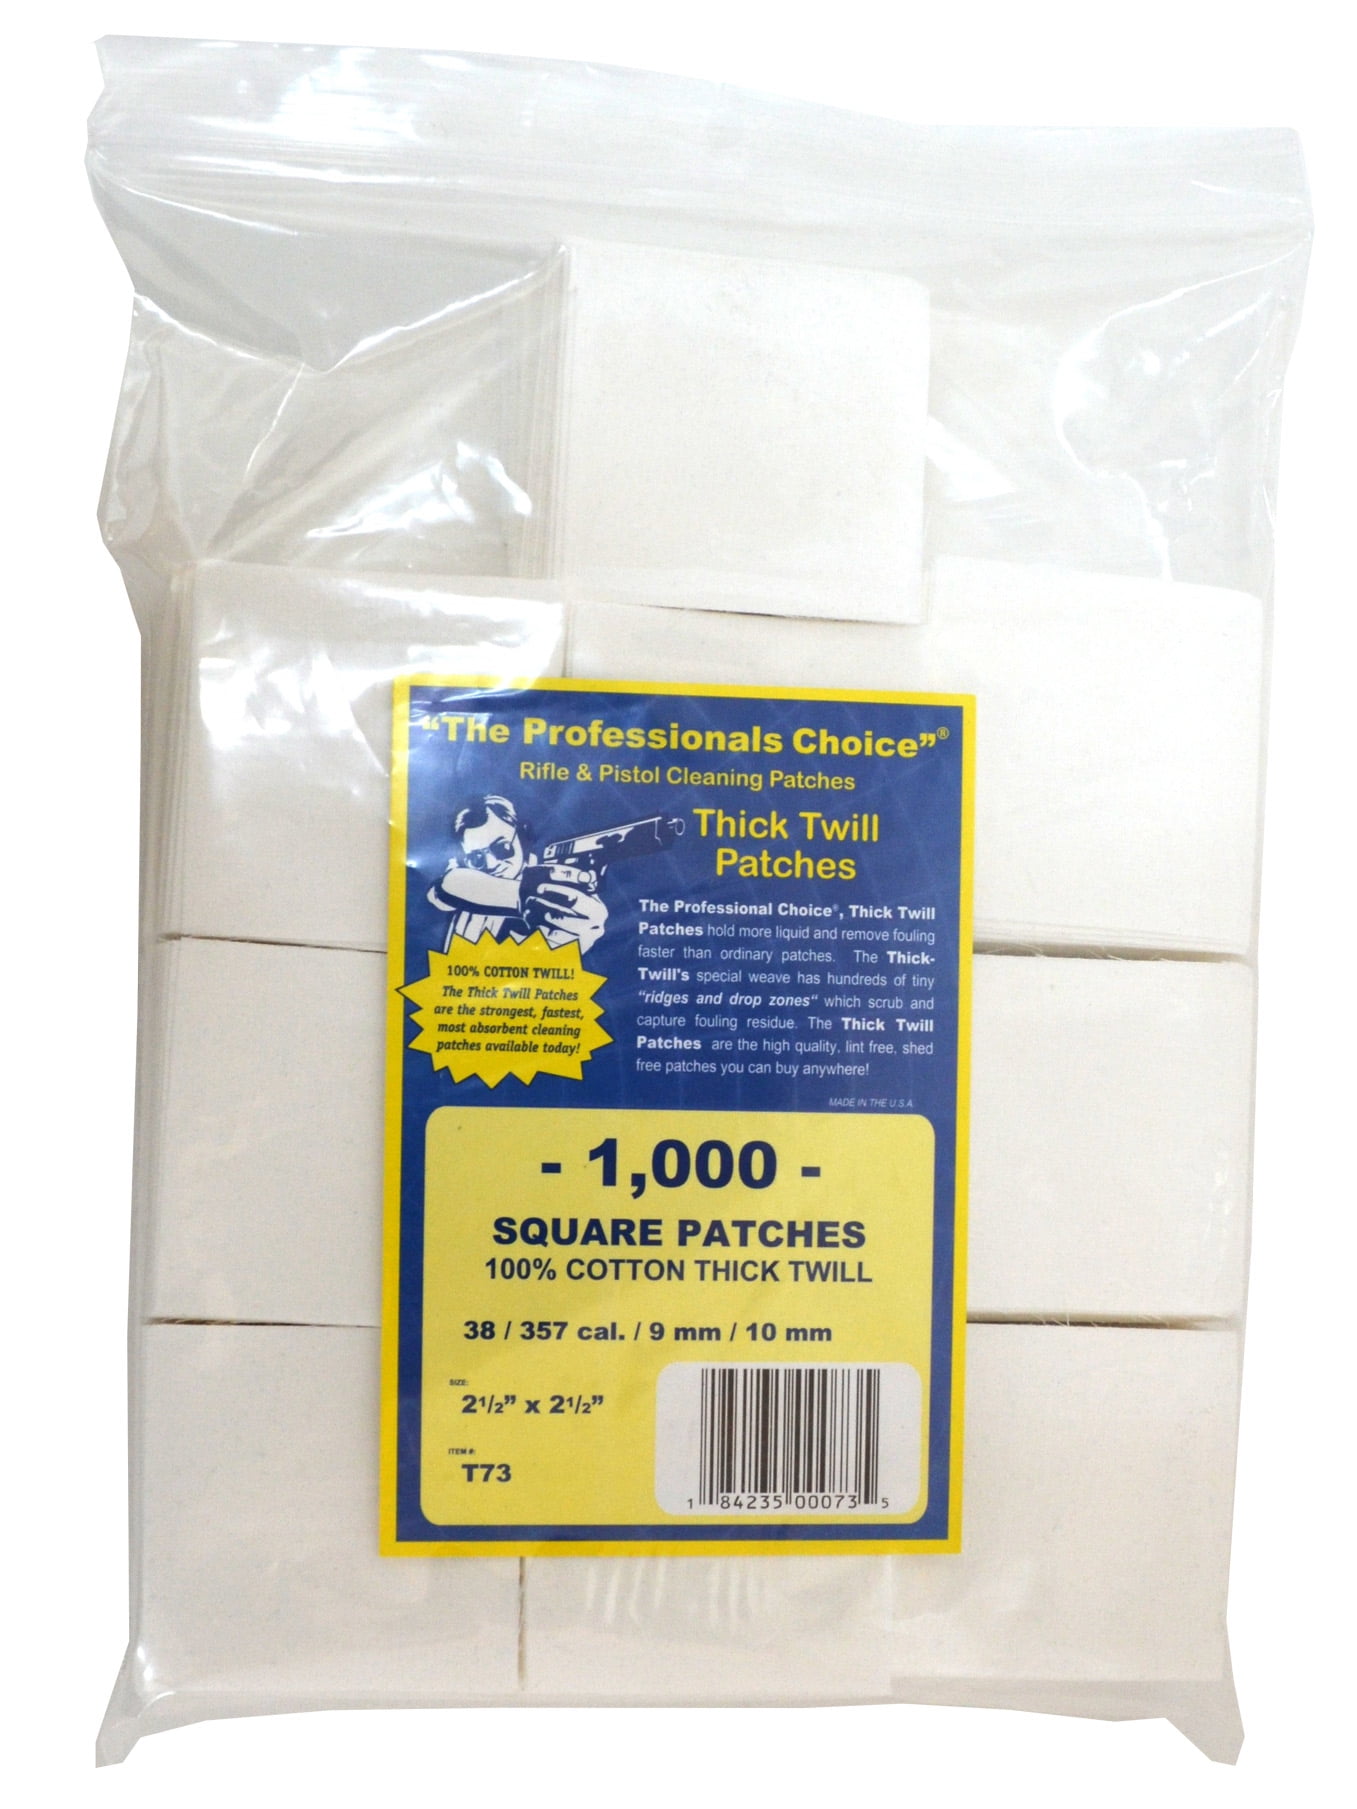 Birchwood Casey 41162 Gun Cleaning Patches 750 Count Durable Cross Weave for sale online 